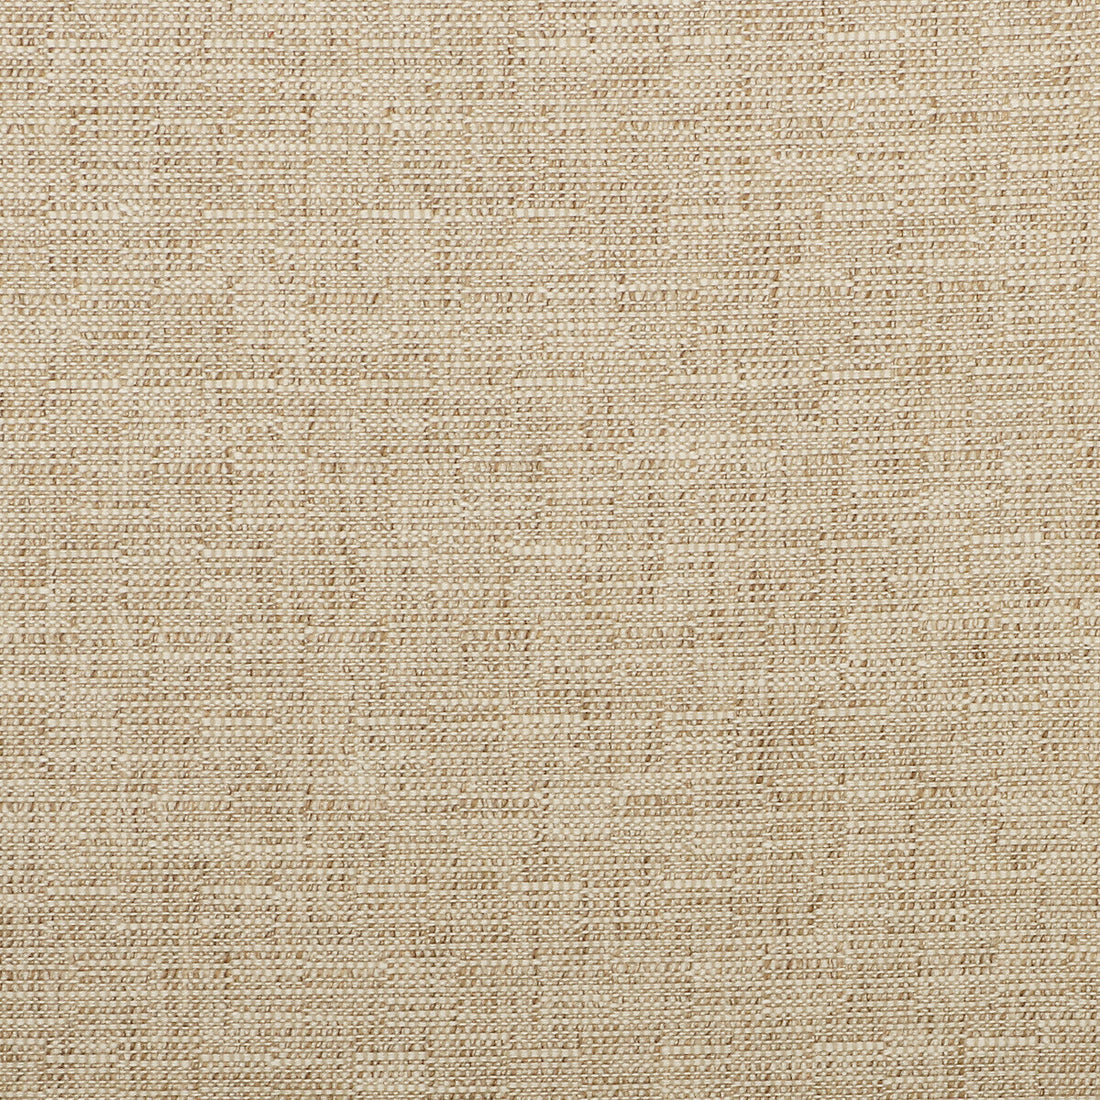 Kravet Smart fabric in 35518-116 color - pattern 35518.116.0 - by Kravet Smart in the Inside Out Performance Fabrics collection